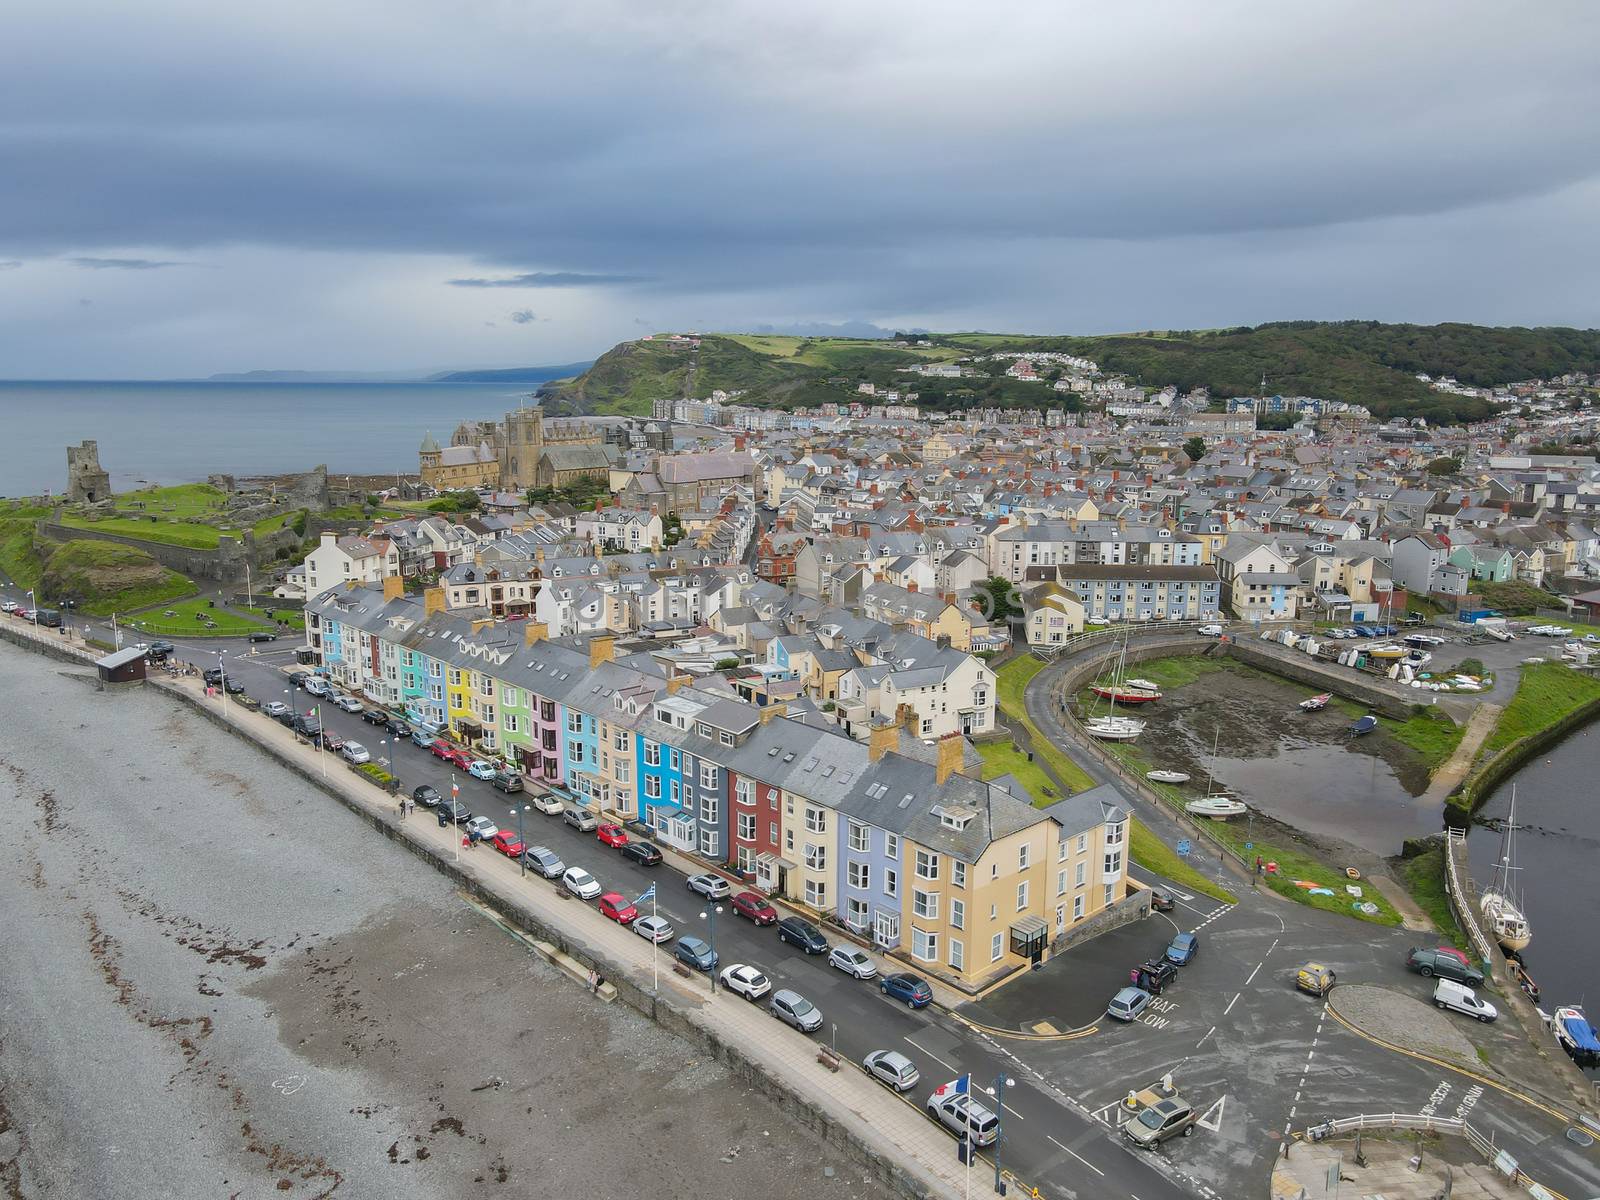 Colourful homes overlooking the sea at the South Beach Promenade in Aberystwyth, Ceredigion, Wales, UK, with the castle and town in the background.